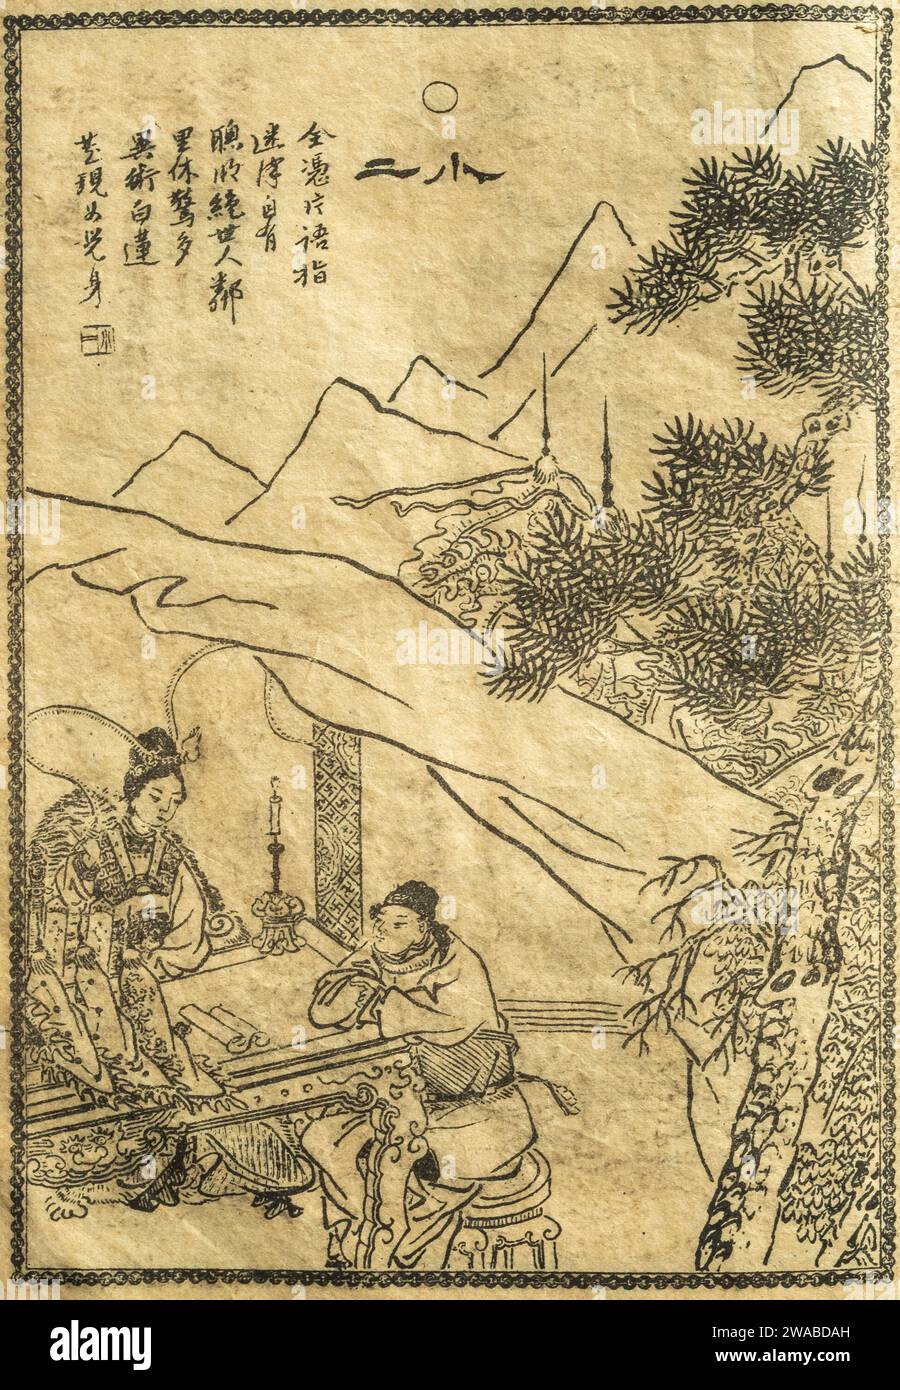 An illustration of a scene from the short story 'Xiao Er' collected in Strange Tales from a Chinese Studio(Liaozhai Zhiyi) by Pu Songling. Stock Photo